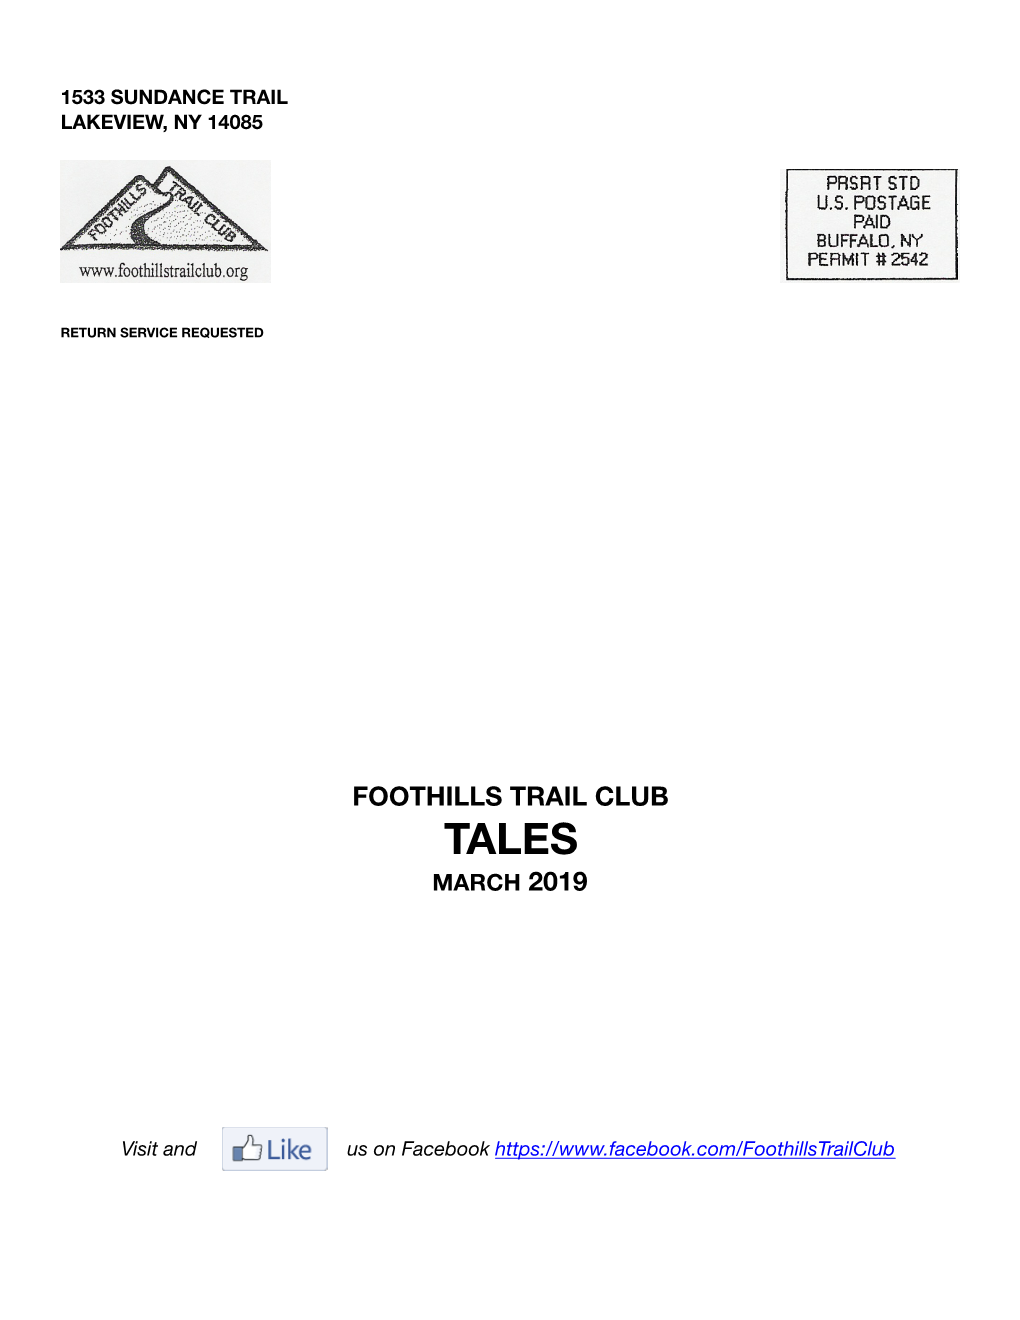 Tales March 2019